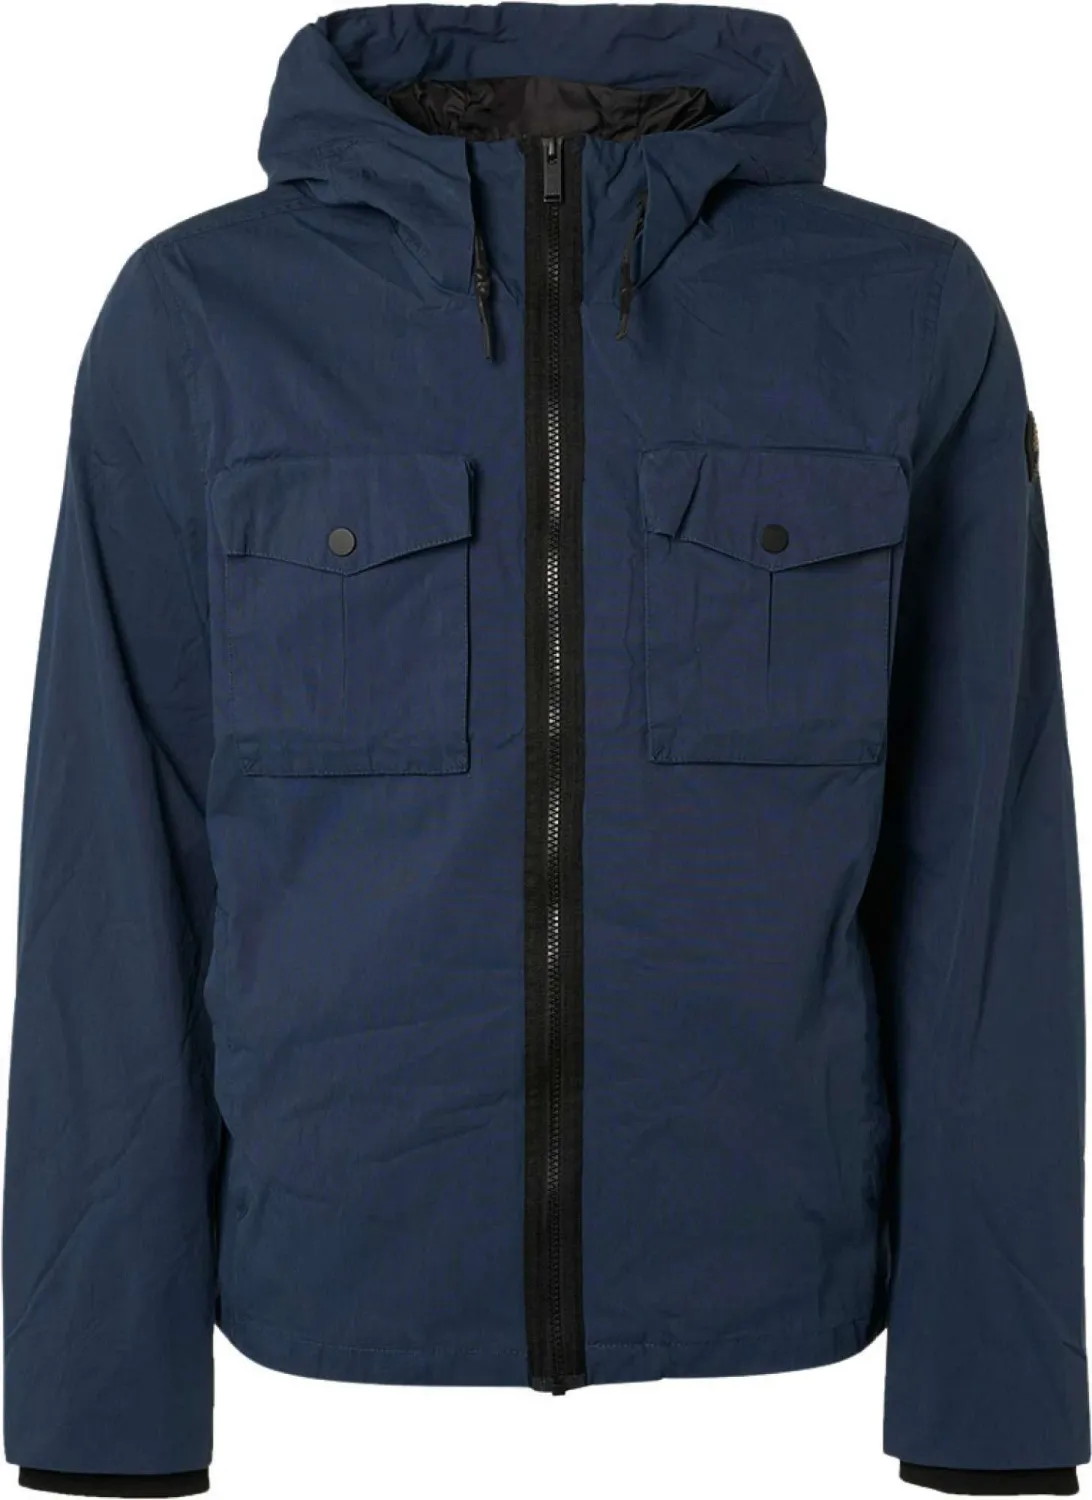 No Excess Hooded Jacket night blue 19630209, Size: M